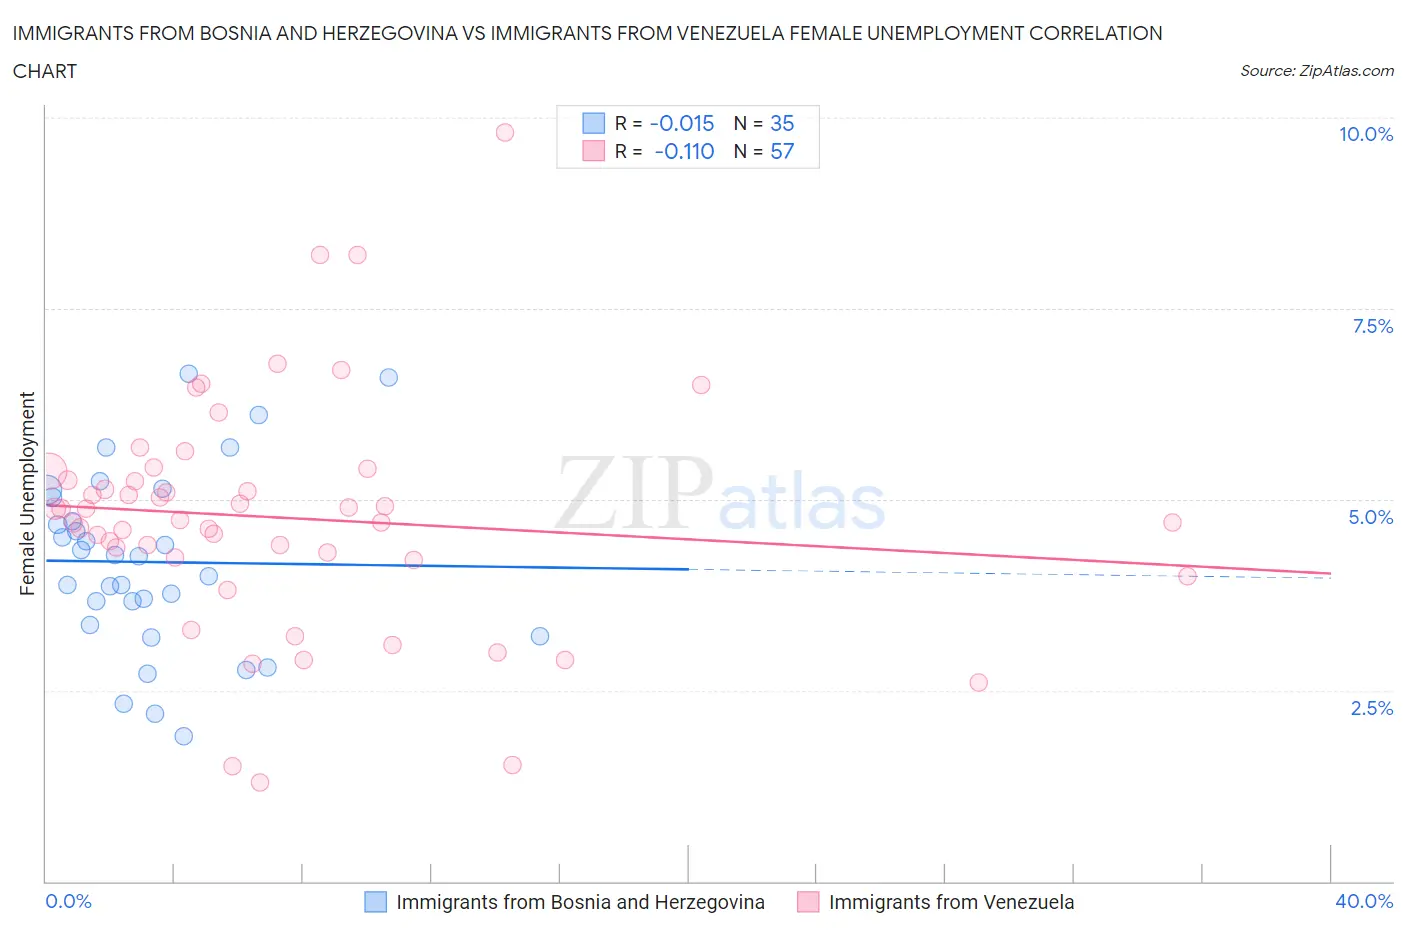 Immigrants from Bosnia and Herzegovina vs Immigrants from Venezuela Female Unemployment